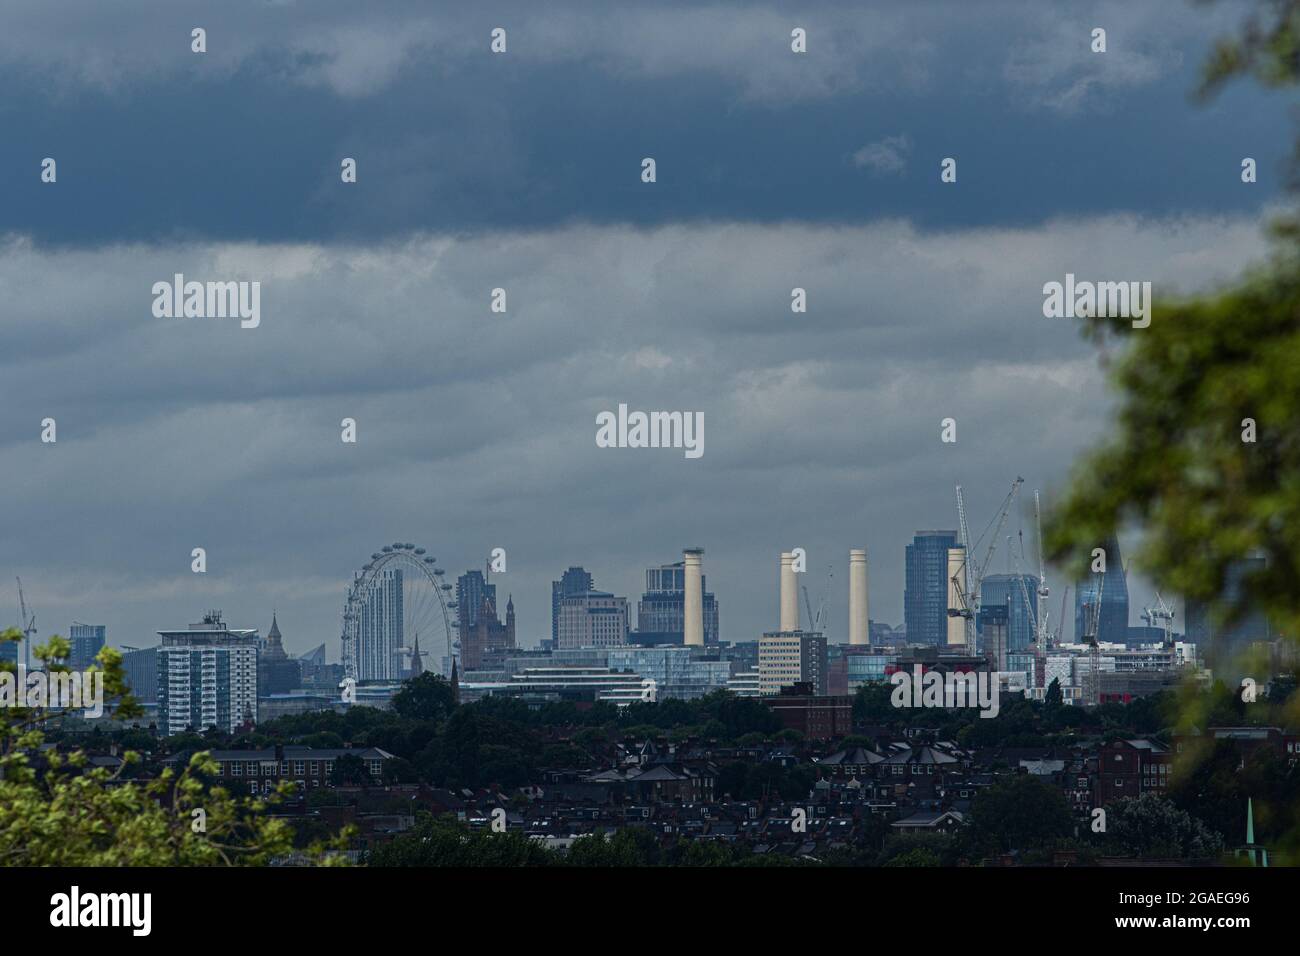 London, UK. 30 July 2021. The London Eye and Battersea chimneys  is shrouded  under storm clouds with unpredictable weather of sunshine showers and gale force winds from Storm Evert in London and southern parts of England. Credit amer ghazzal/Alamy Live News. Stock Photo